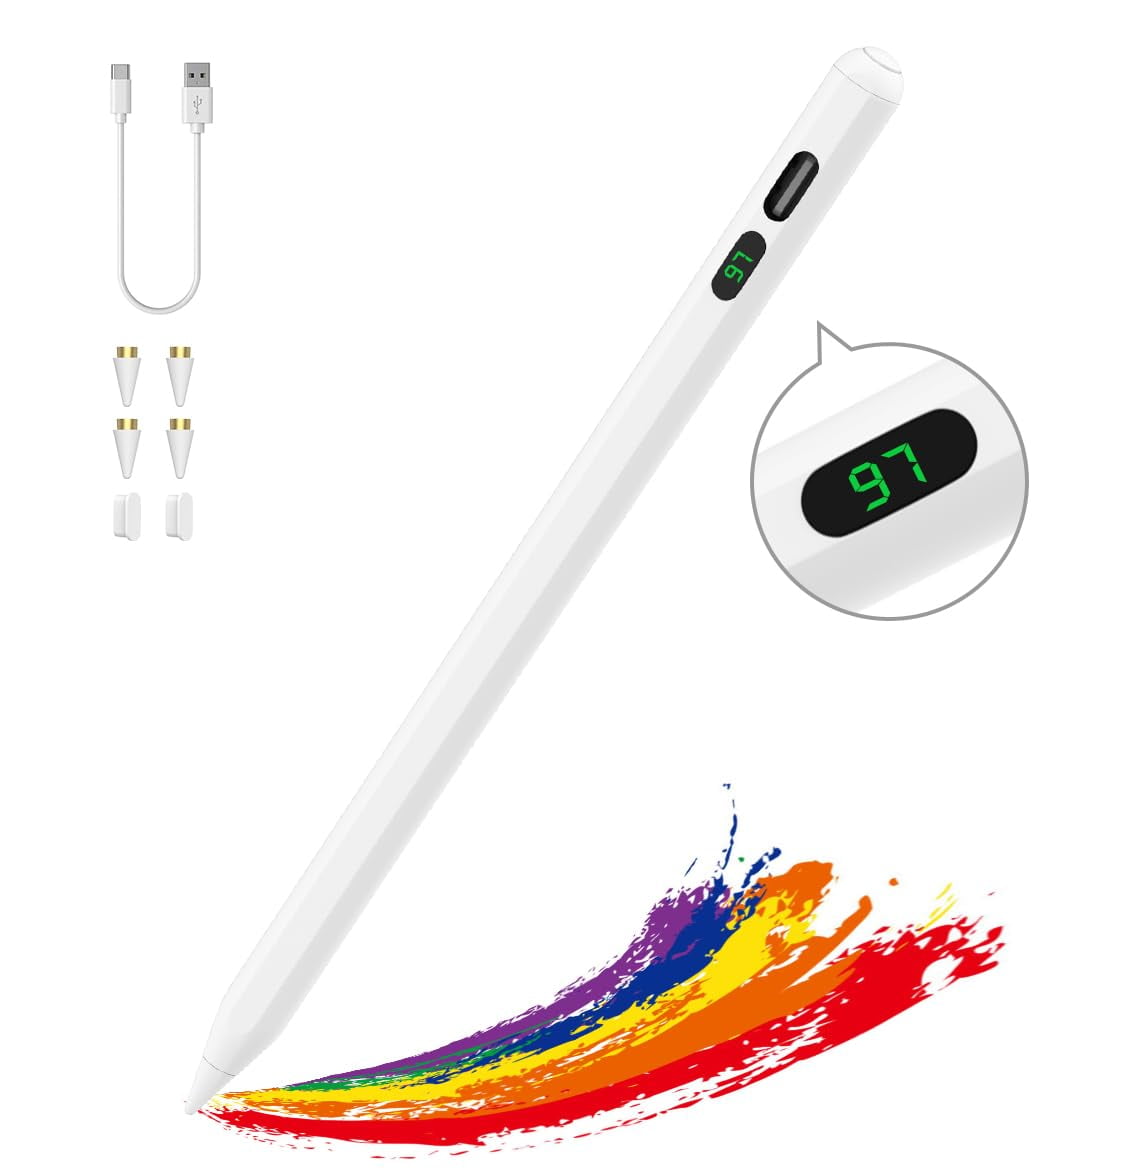  Buy Etercycle Stylus Pen for Android Phone Tablet ipad  Capacitive High Precision Touch Sceen Pen for Apple Pencil iPhone iPad air  (White) Online at Low Prices in India